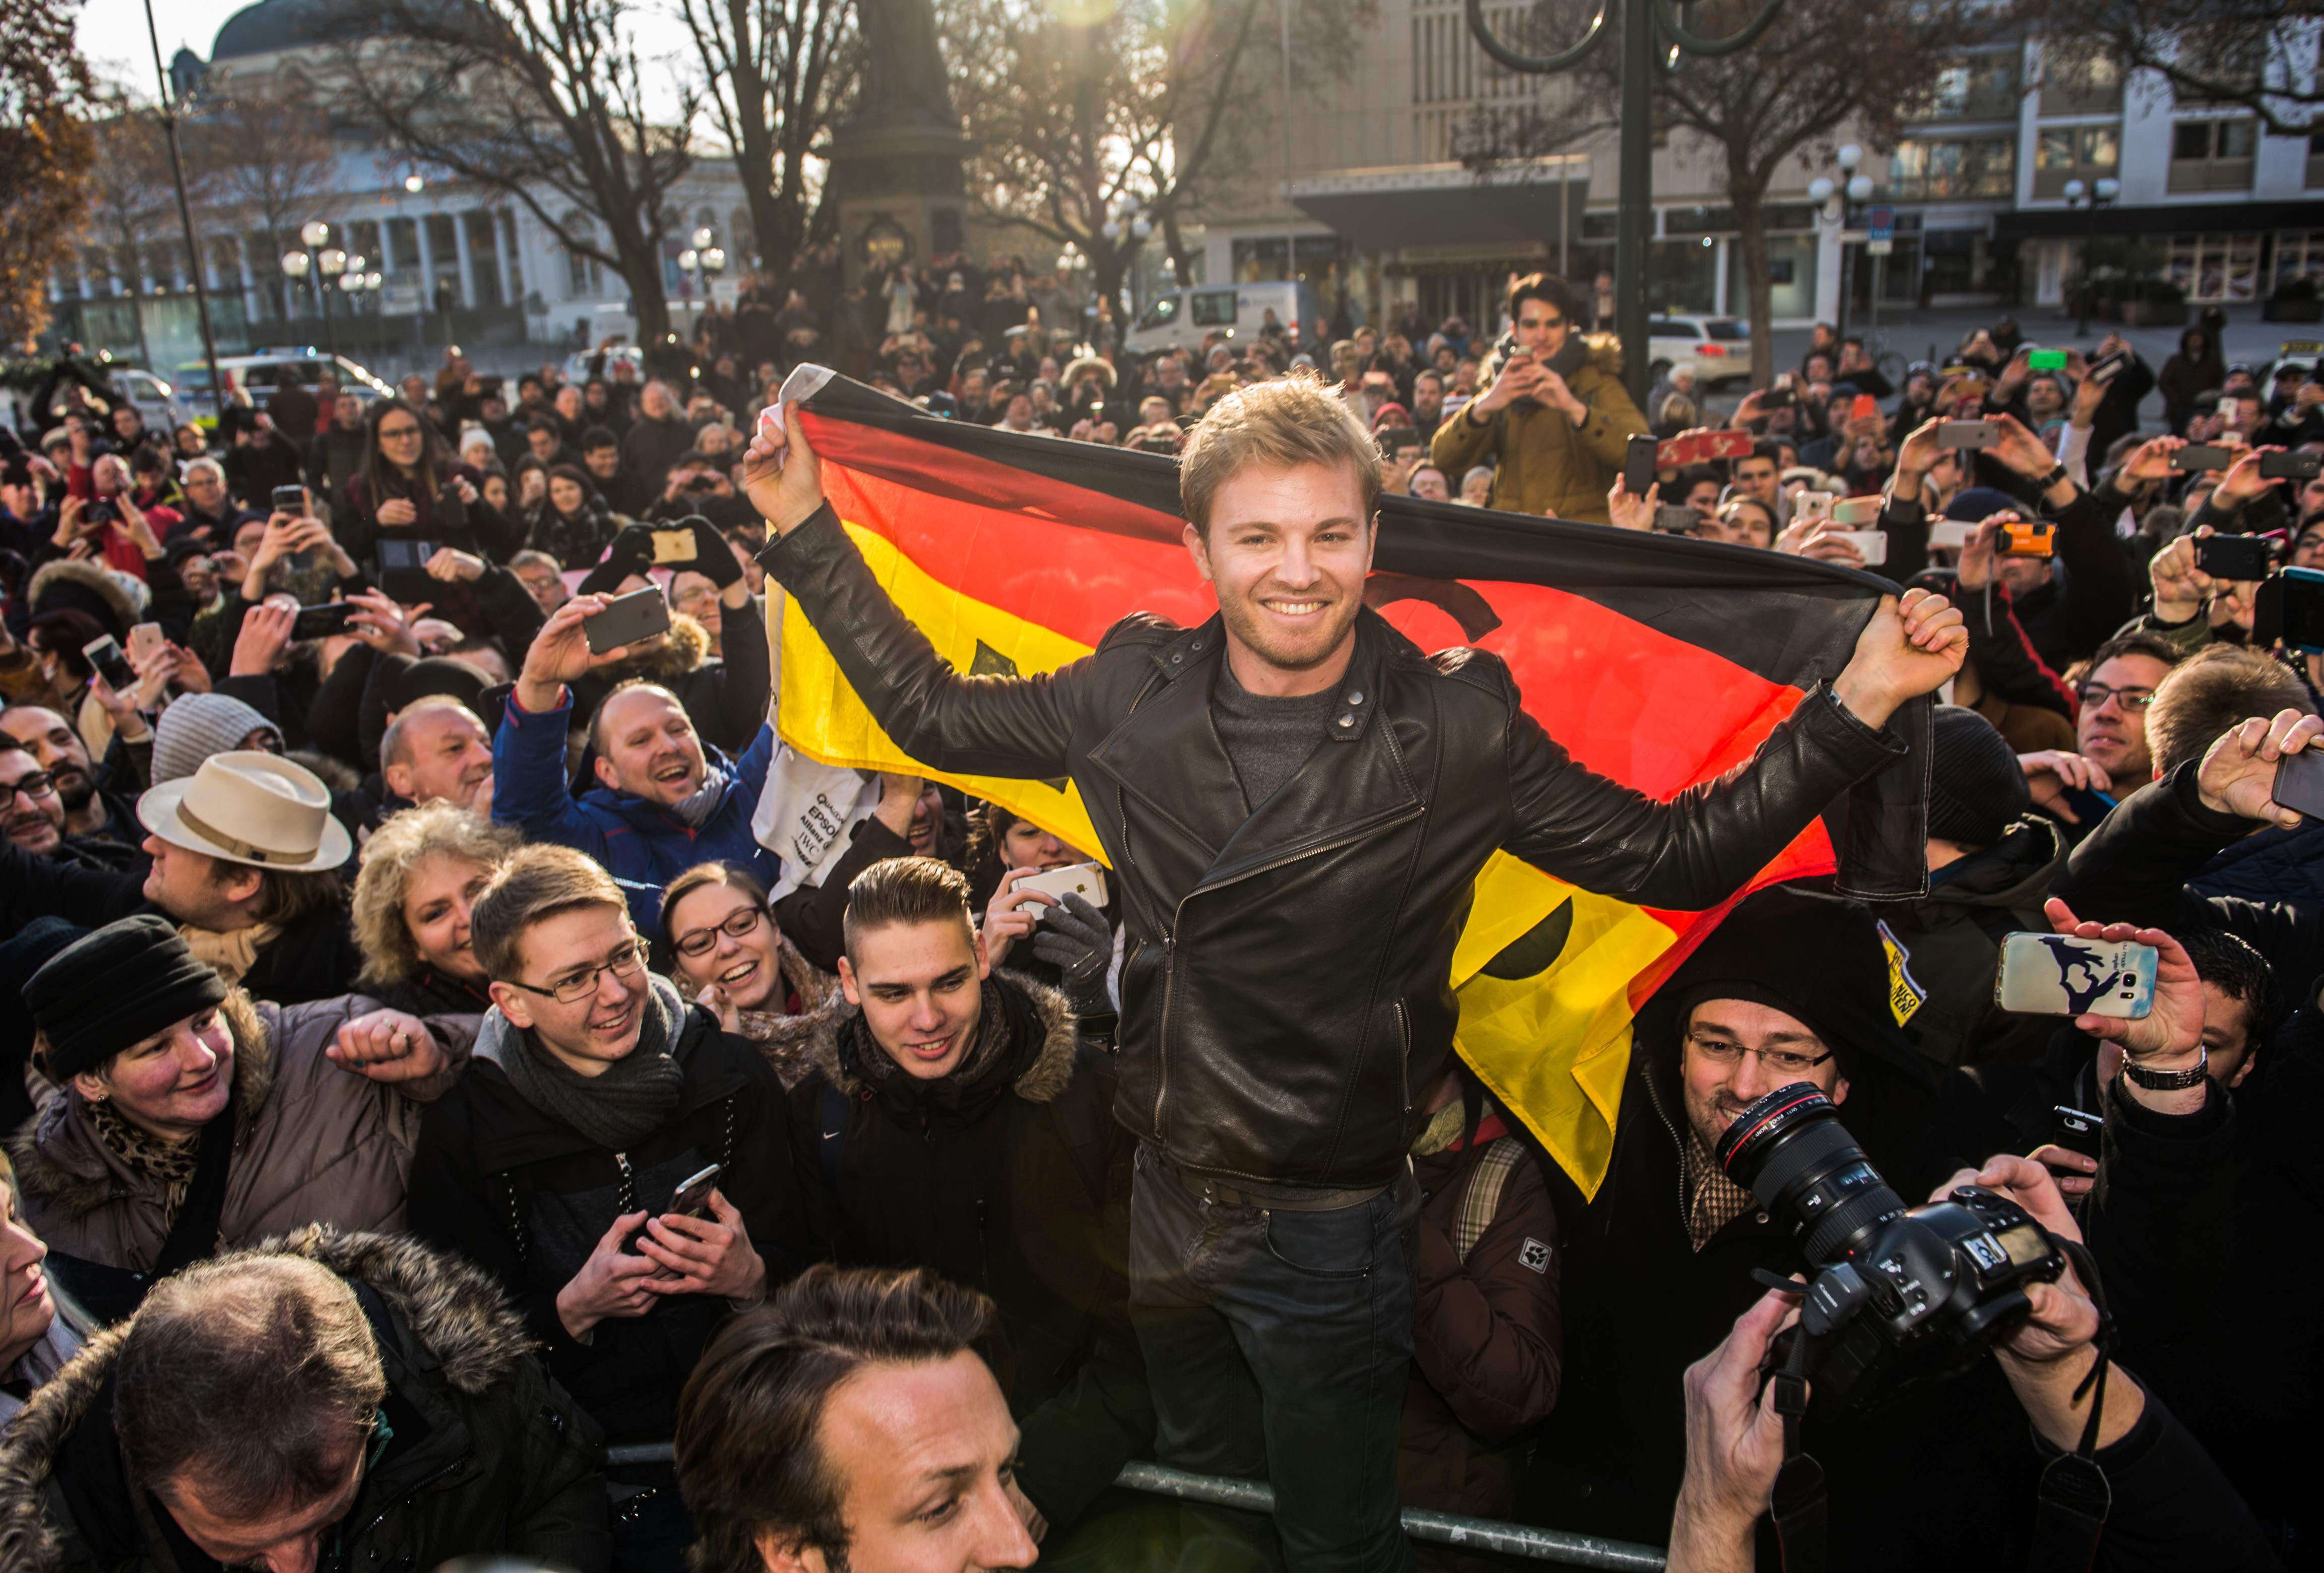 New Formula One world champion Nico Rosberg with a German flag as he meets fans in his home town of Wiesbaden in western Germany. Photo: AFP